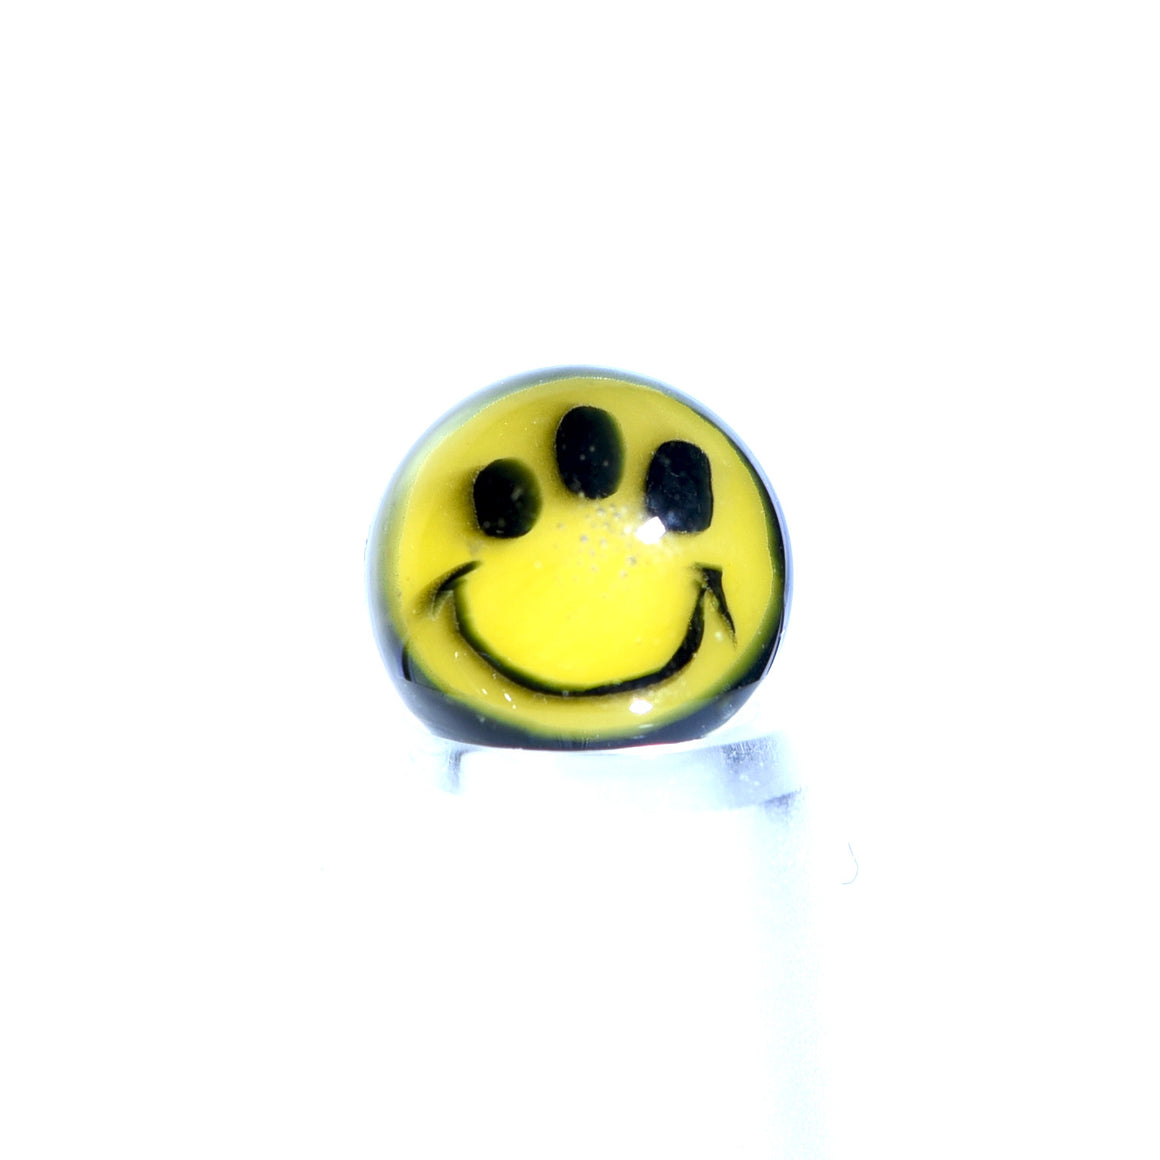 ~6mm Boro-encased Millie Terp Pearl by Ryan McCluer - 3-eyed Smiley Face